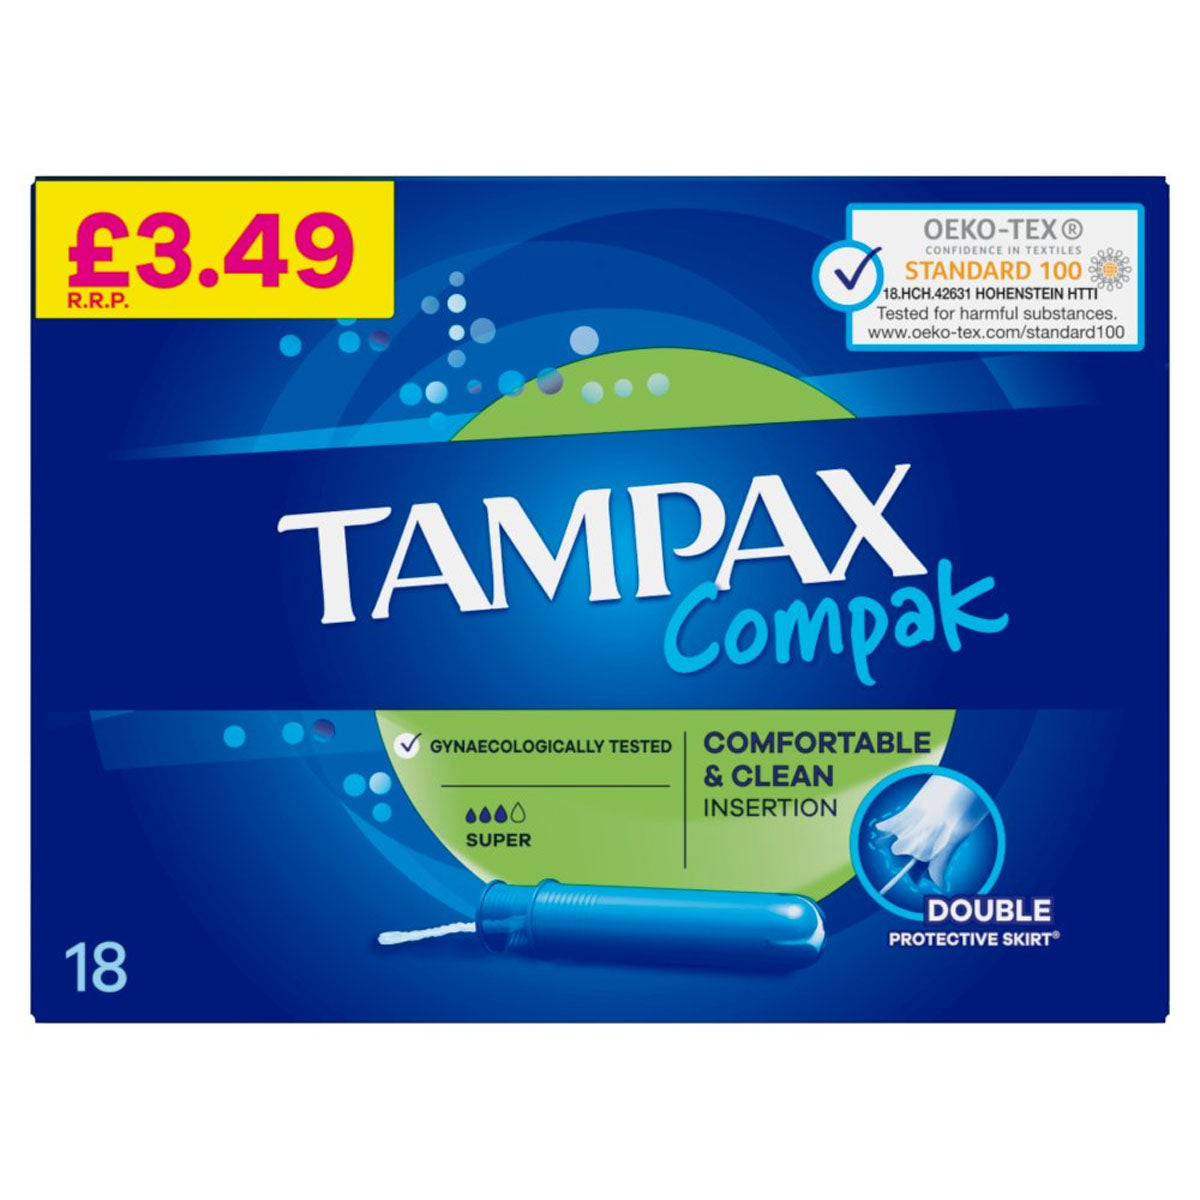 Tampax Compak - Super Tampons With Applicator - 18pcs tampax compak - super tampons with applicator - 18pcs tampax compak - super tampons with applicator - 18pcs tampax compak - super tampons with applicator - 18pcs tampax compak - super tampons with applicator- 18pcs.